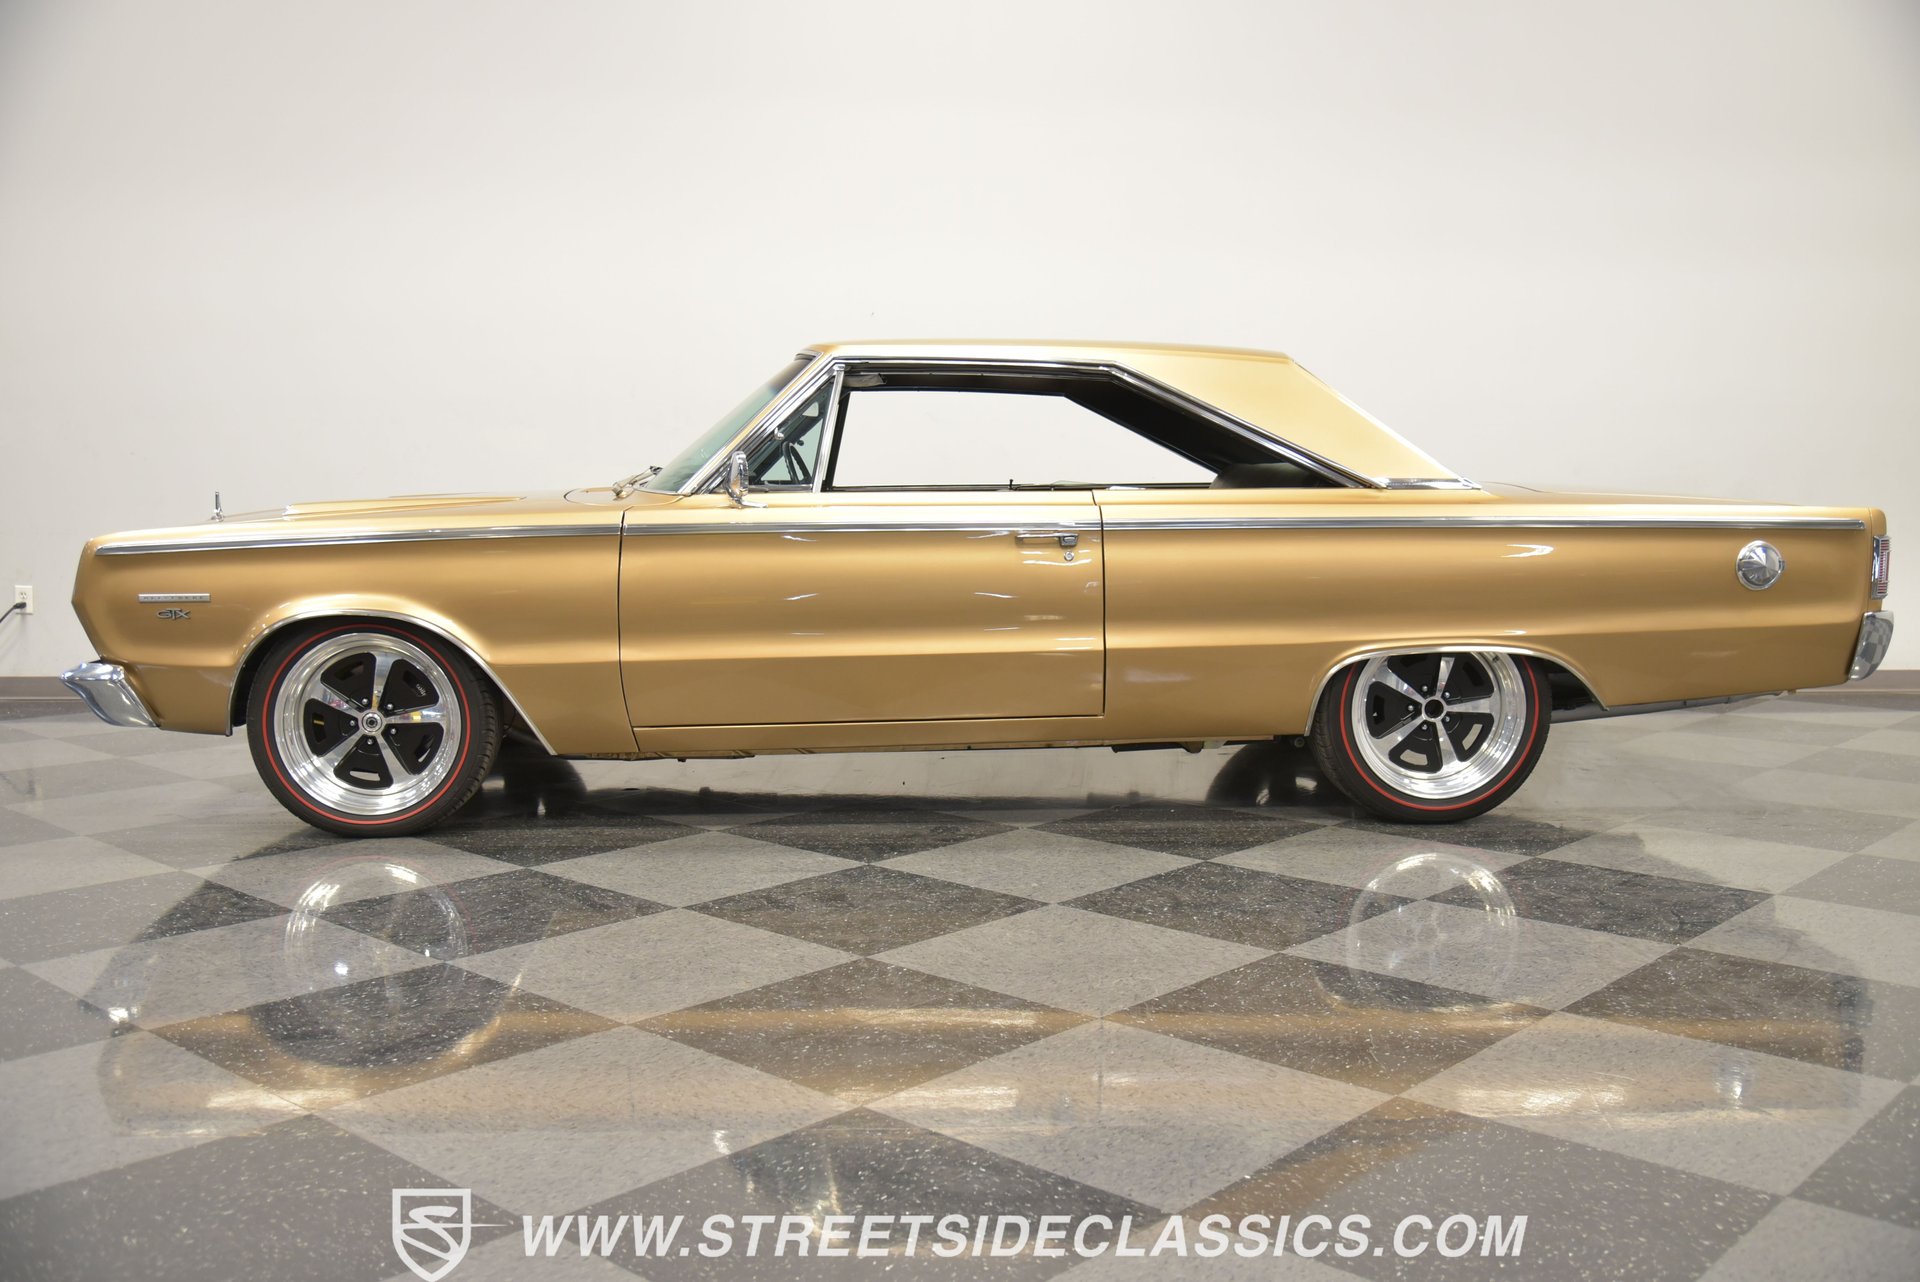 1967 Plymouth Belvedere  Classic Cars for Sale - Streetside Classics